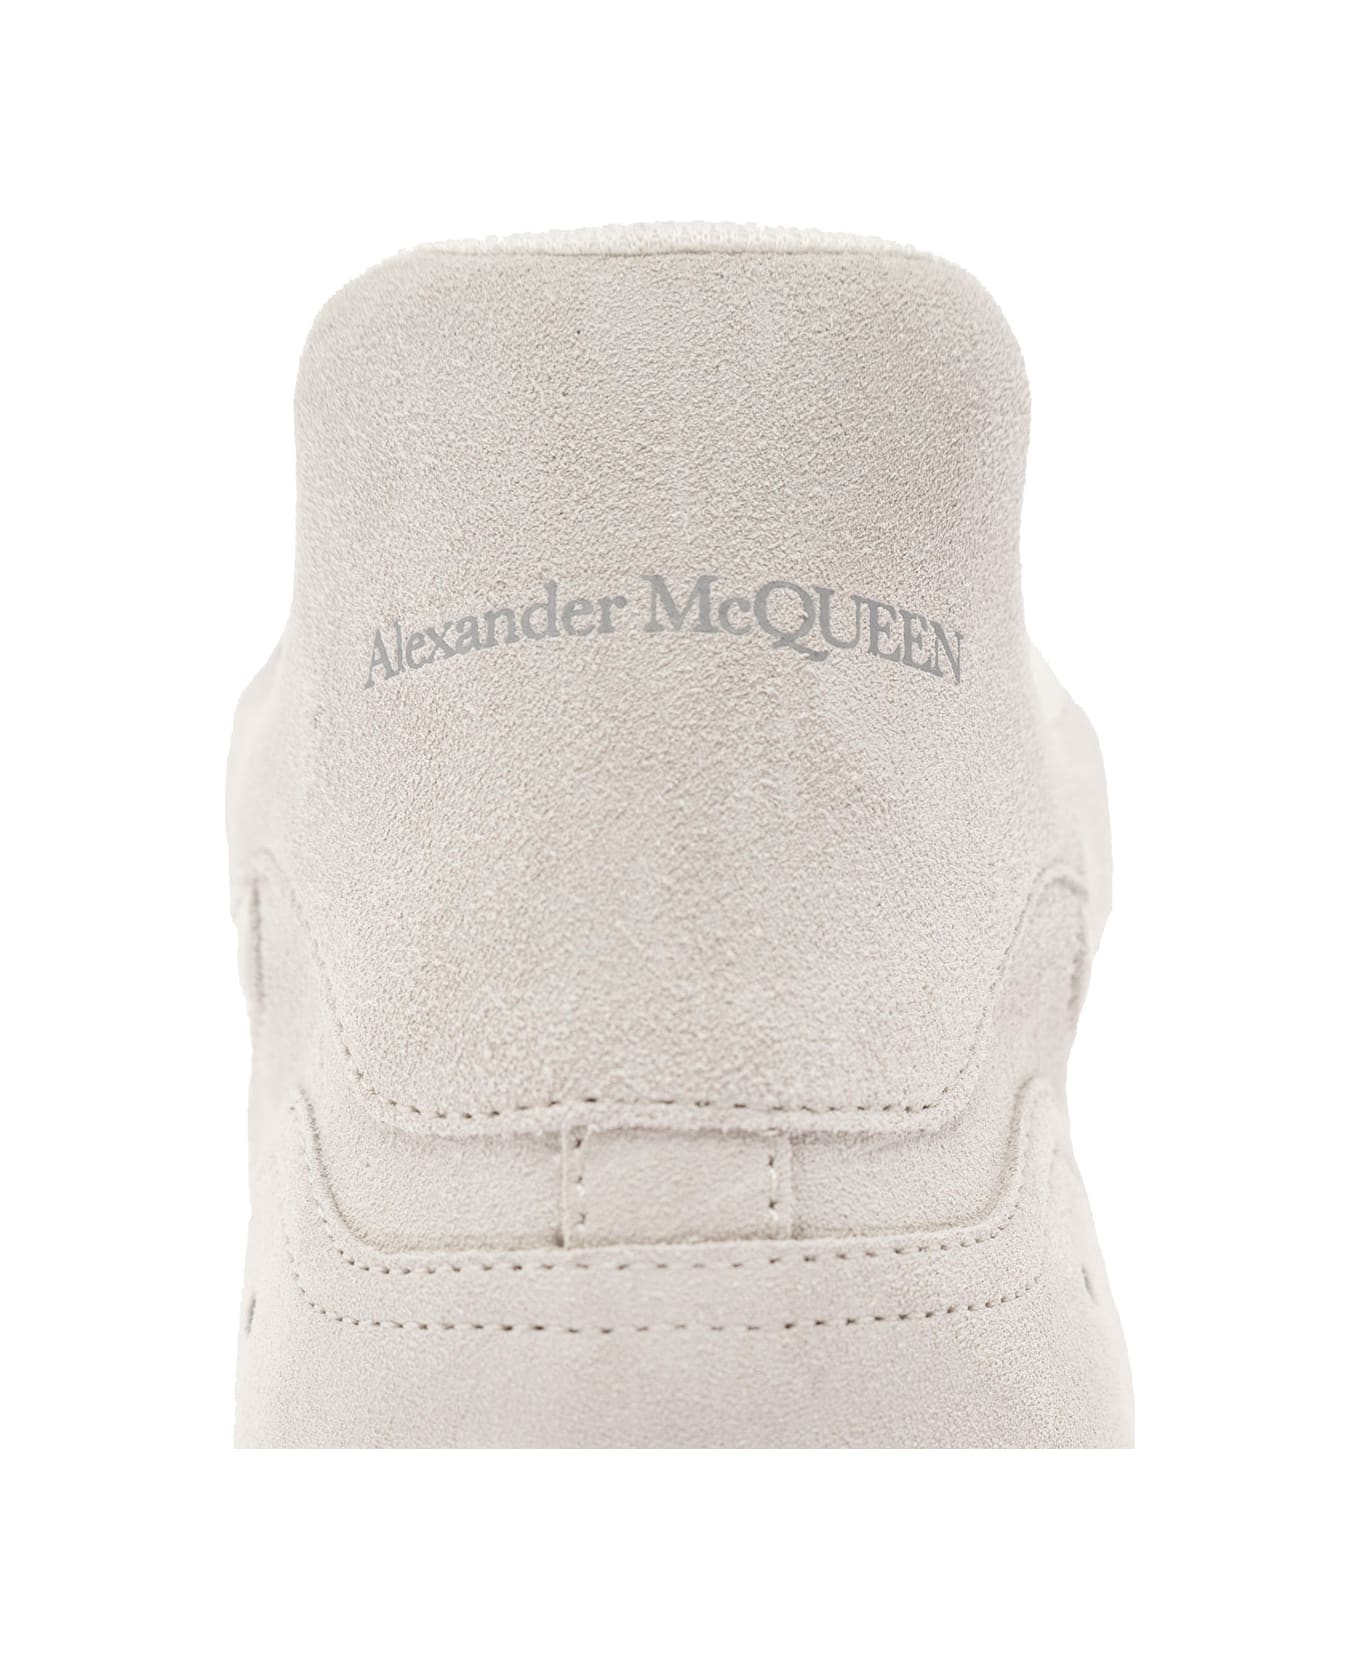 Alexander McQueen Man's White Suede Leather Sneakers - White